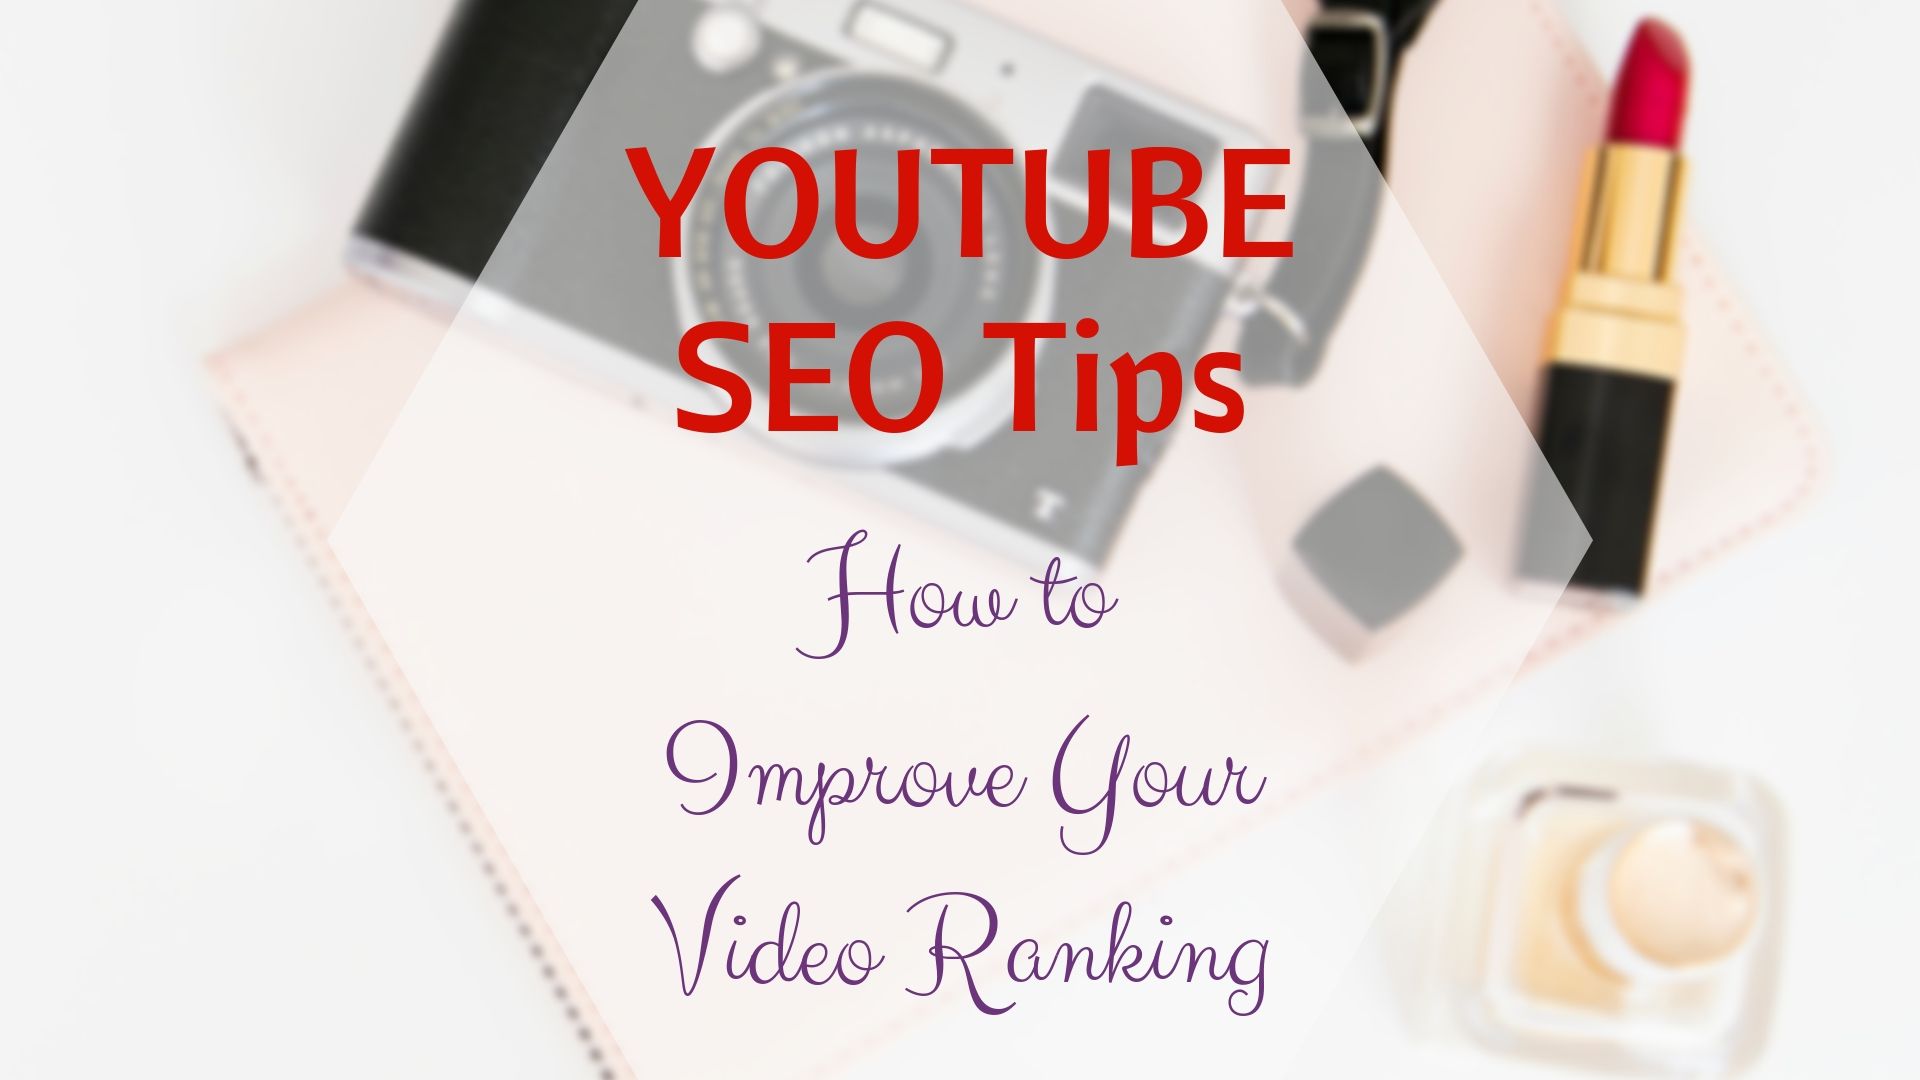 How Do You Start SEO on YouTube? – How to Improve Your Video Ranking